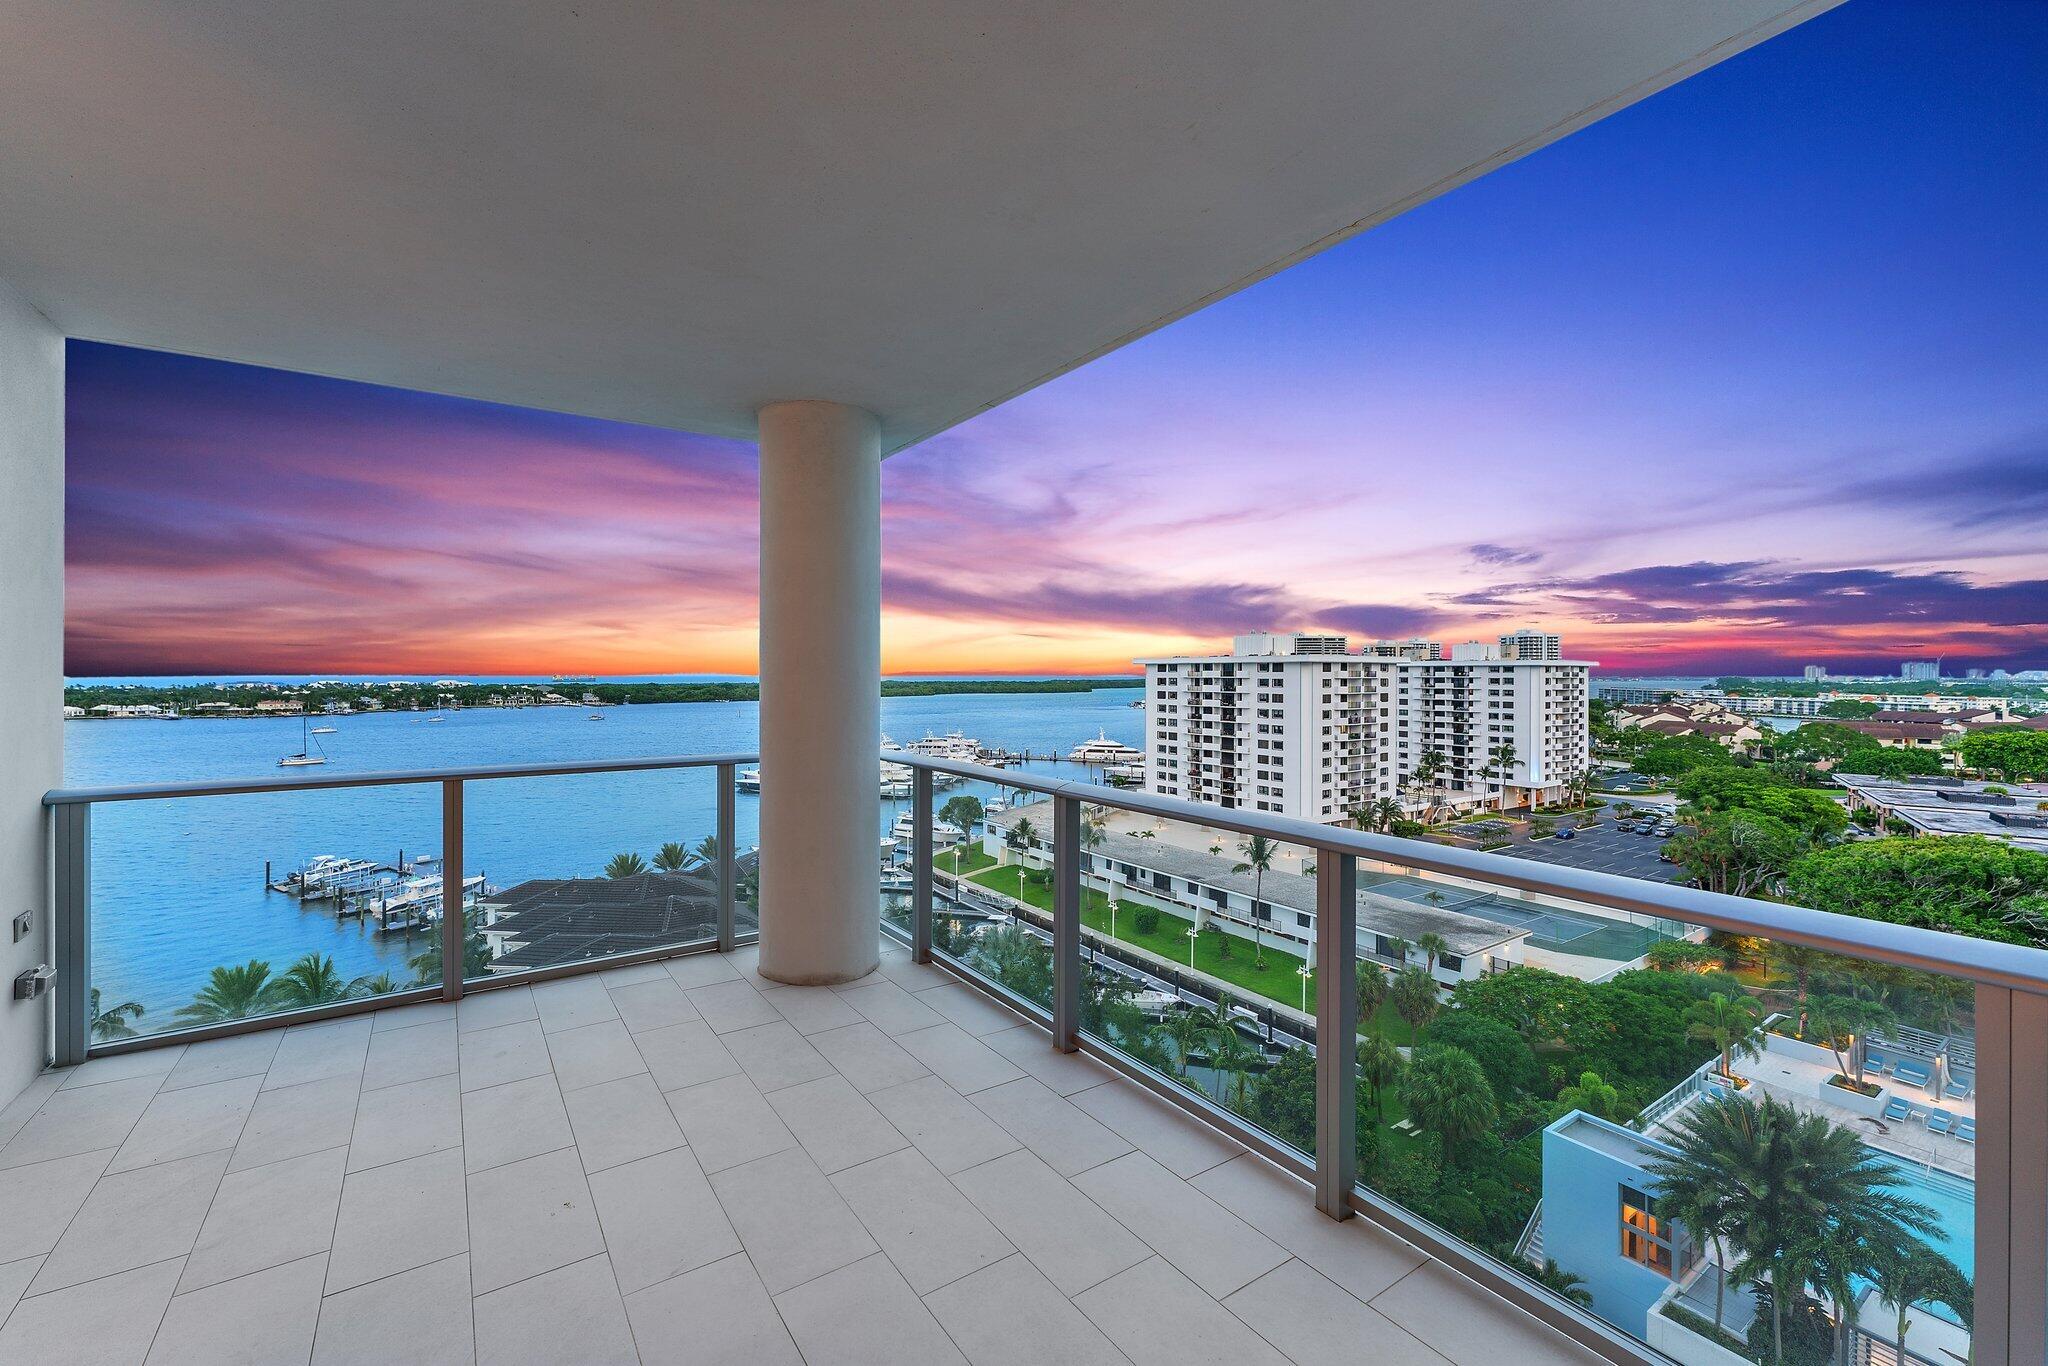 Simply stunning and ready for immediate enjoyment! Embrace coastal elegance with breathtaking intracoastal and ocean views from this exquisite 10th-floor unit in Water Club's prime building #2, offering the most stunning vistas in North Palm Beach. This spacious nearly 2000 sq. ft. residence features 2 bedrooms, plus a den/office, and 2.5 bathrooms, all with luxurious modern finishes. Enjoy the floor-to-ceiling impact glass windows and sliders that bring in abundant natural light. The kitchen features European-style sleek acrylic cabinetry, quartz countertops, an aqua sea-glass subway tile backsplash, and premium Jenn-Air appliances. The boutique-style tower provides a private elevator entrance to each unit, ensuring exclusivity and privacy. Savor sunrises and stunning sunsets from two oversized covered balconies. Water Club offers unmatched amenities, including a 24-hour concierge, manned gate/security, garage parking with two ideally located assigned spaces, a modern fitness center with a Pilates/Yoga studio, pickleball courts, a lap pool, a waterfront resort-style pool, a hot tub, and two outdoor fire pits. Pet lovers will appreciate the private dog park in this pet friendly community. Owners and guests can enjoy day dock usage and access to a resident conference room. Two private storage areas provide ample space for all your extras. Located just a short drive from top restaurants, excellent shopping, beautiful beaches, and world-class golf courses, Water Club offers both convenience and luxury. PBIA is only 20 minutes away, and the newly redesigned North Palm Beach Country Club, featuring a Jack Nicklaus Signature golf course, is right across the street. Welcome to paradise and a maintenance-free lifestyle at Water Club.